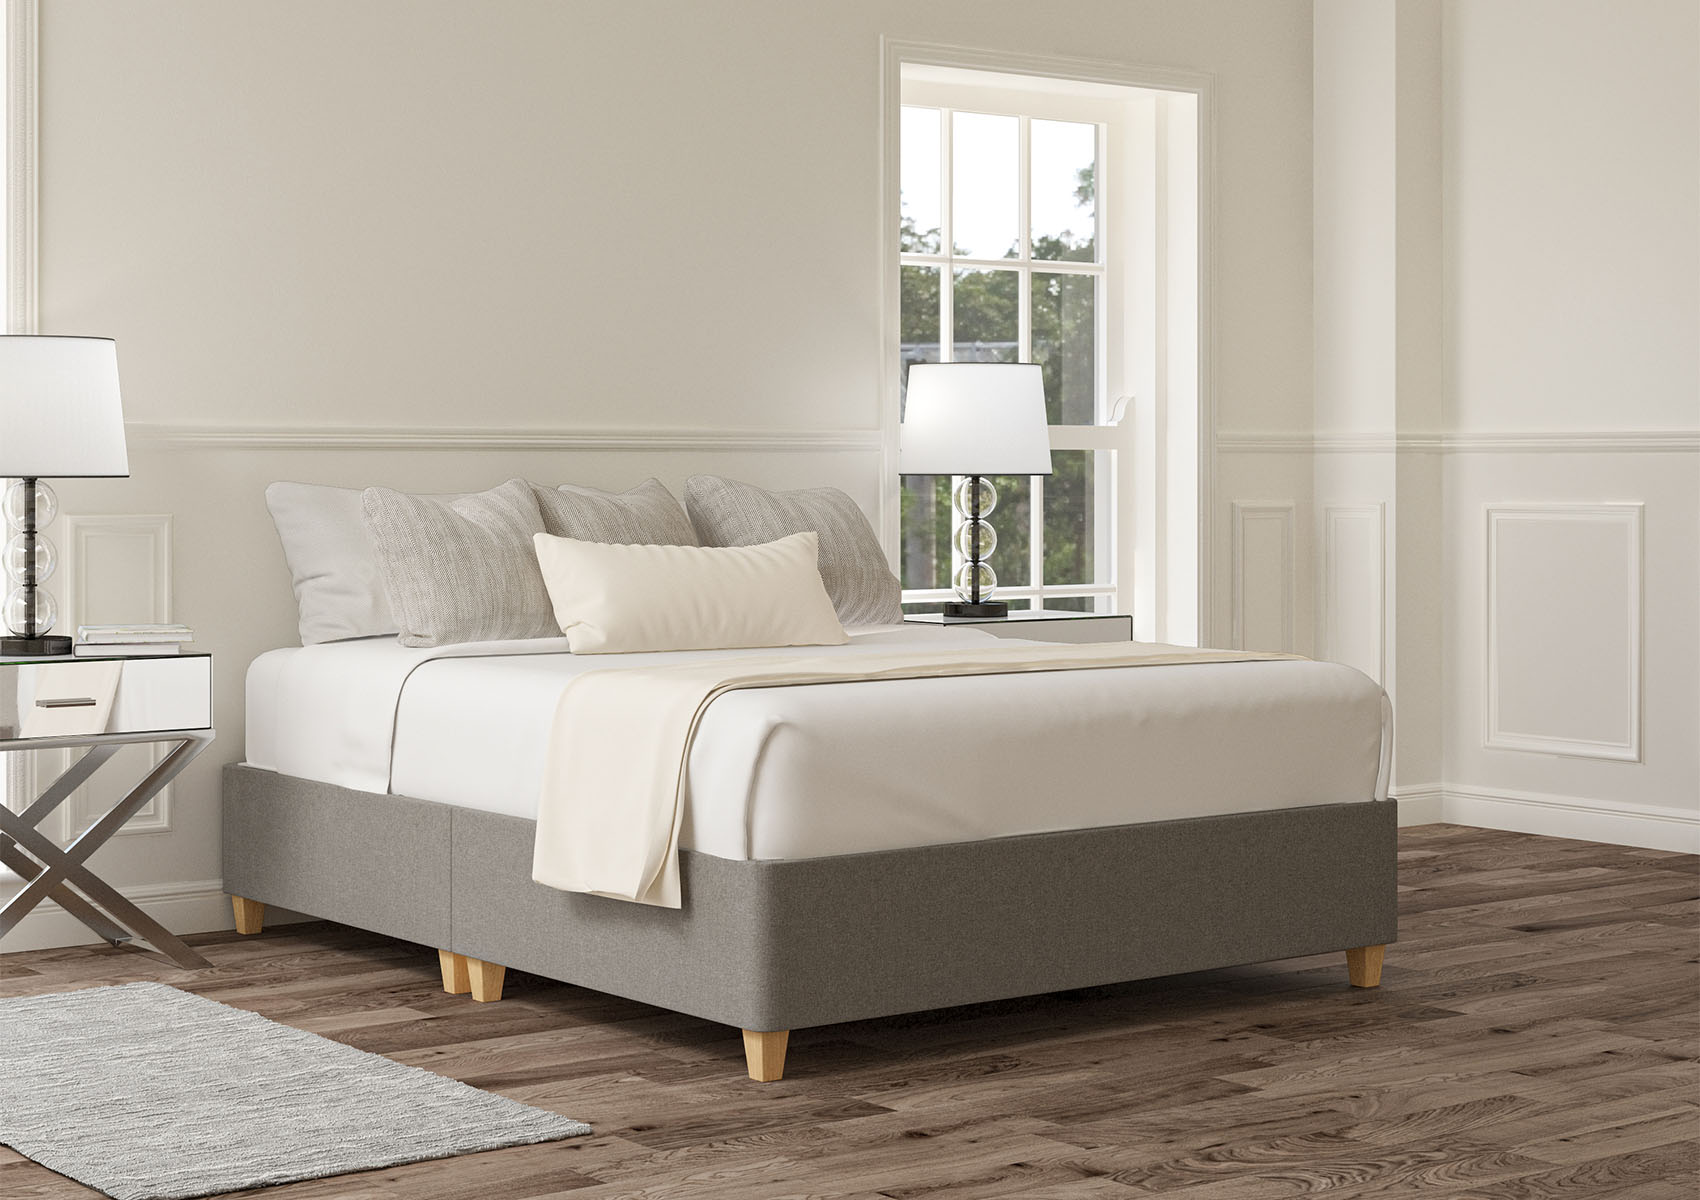 View Shallow Heritage Royal Upholstered Single Divan Bed Time4Sleep information